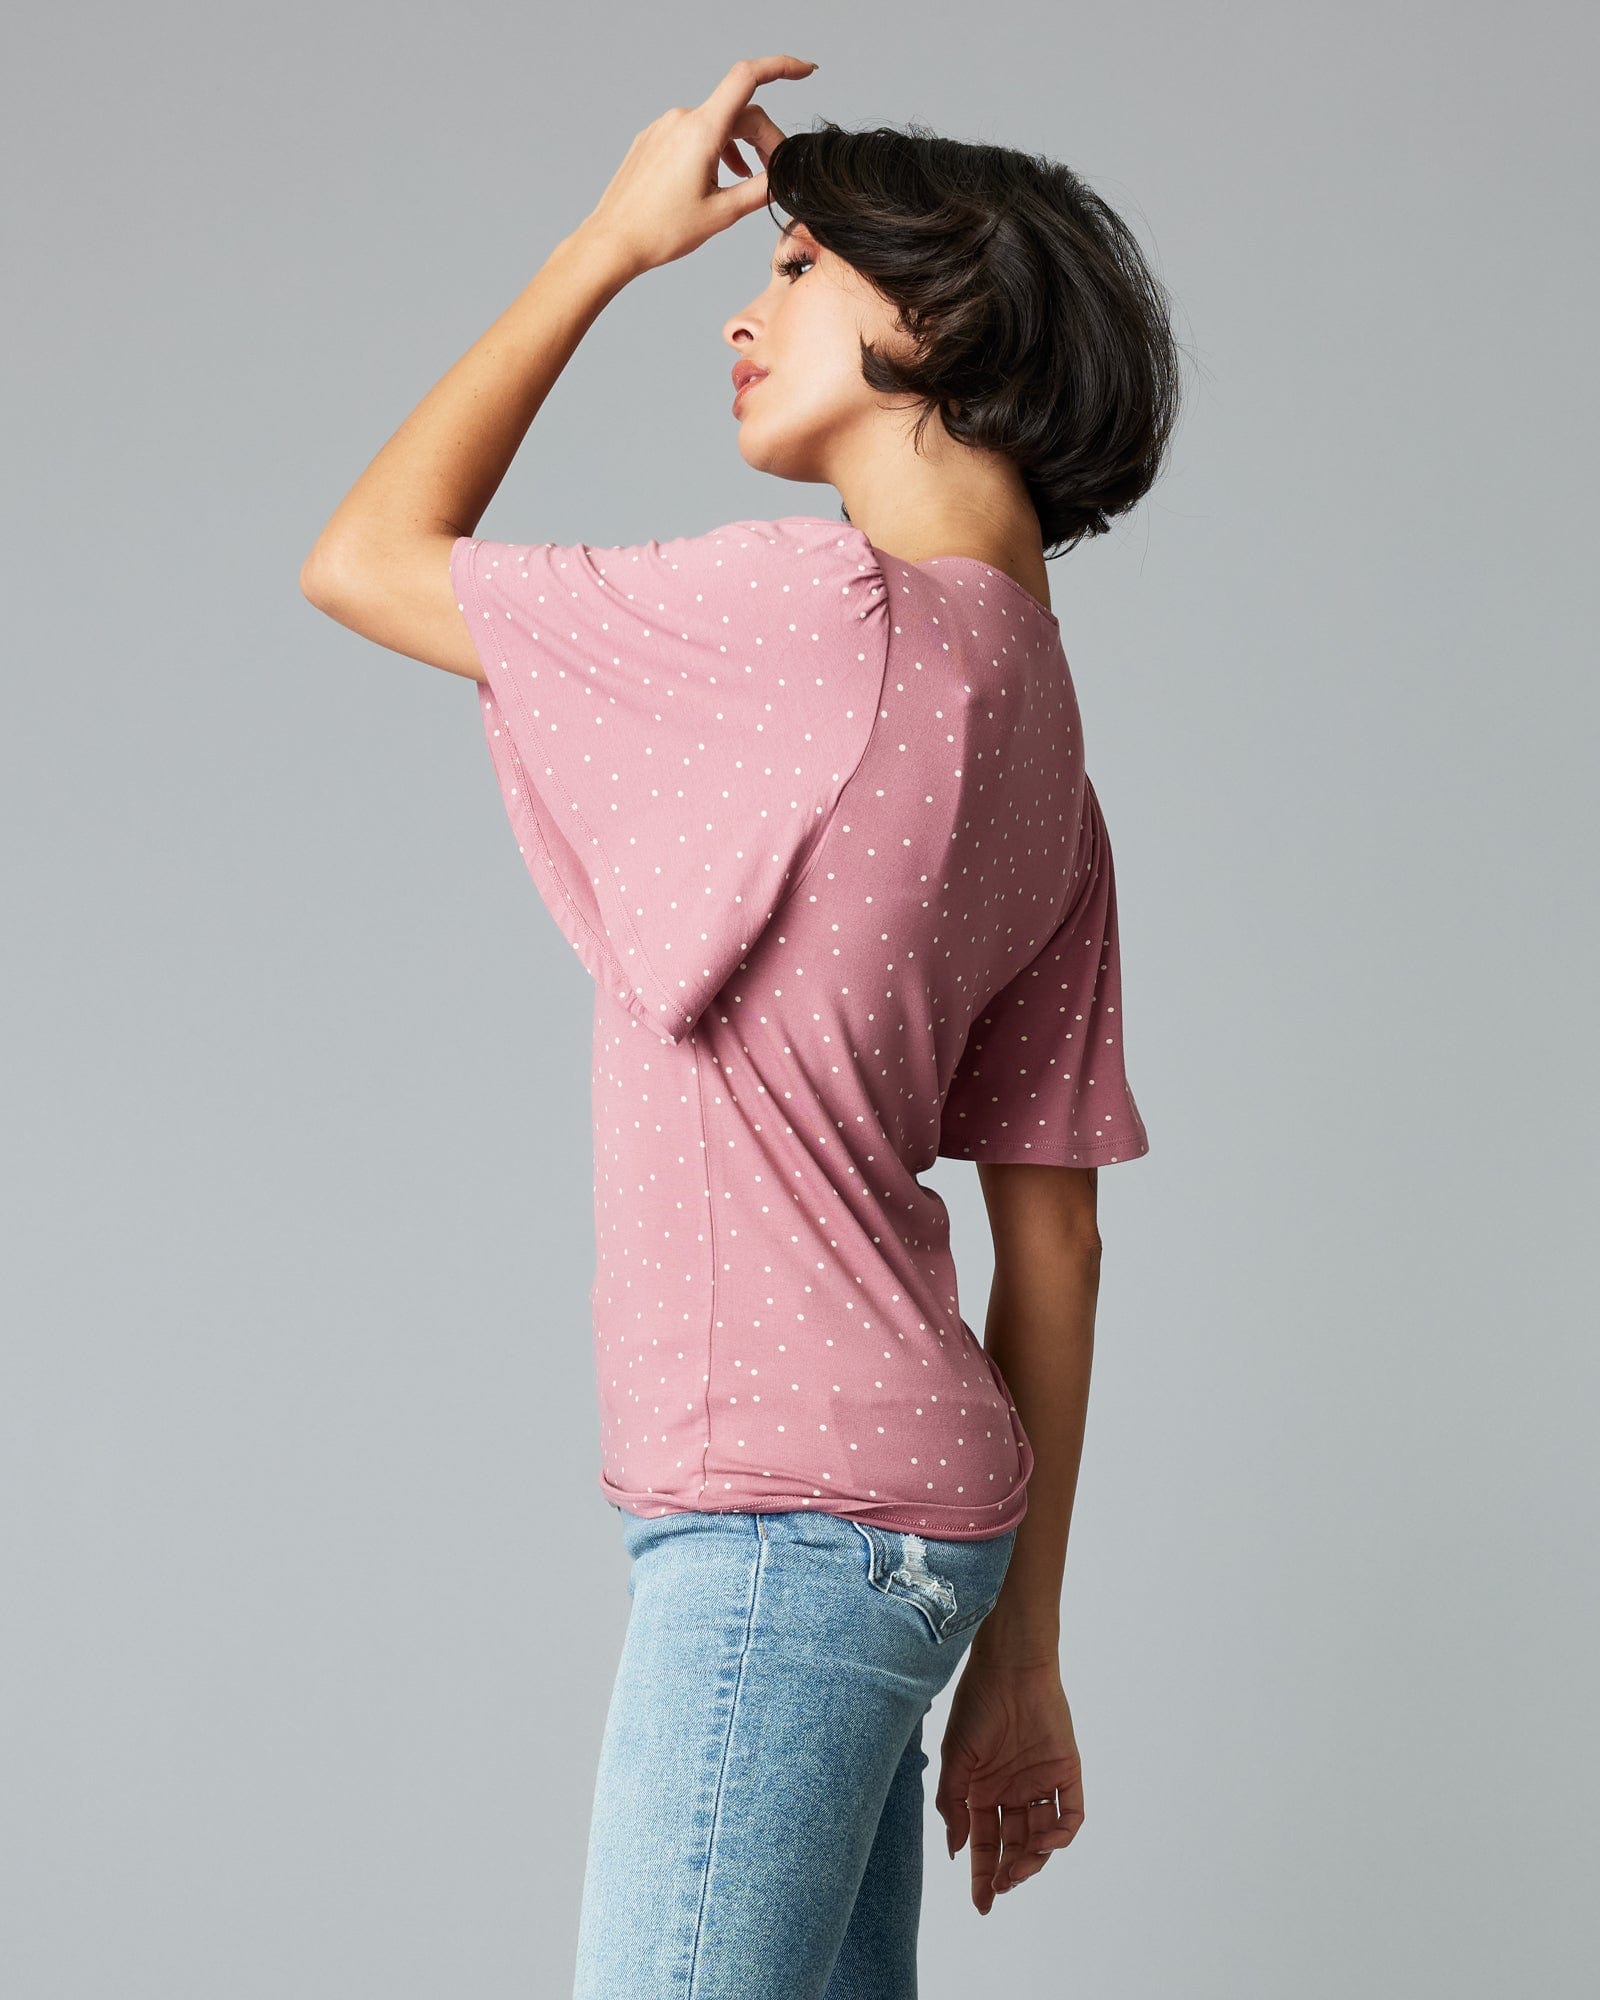 Woman in a short flutter sleee, v-neck, pink with white polka dots top.